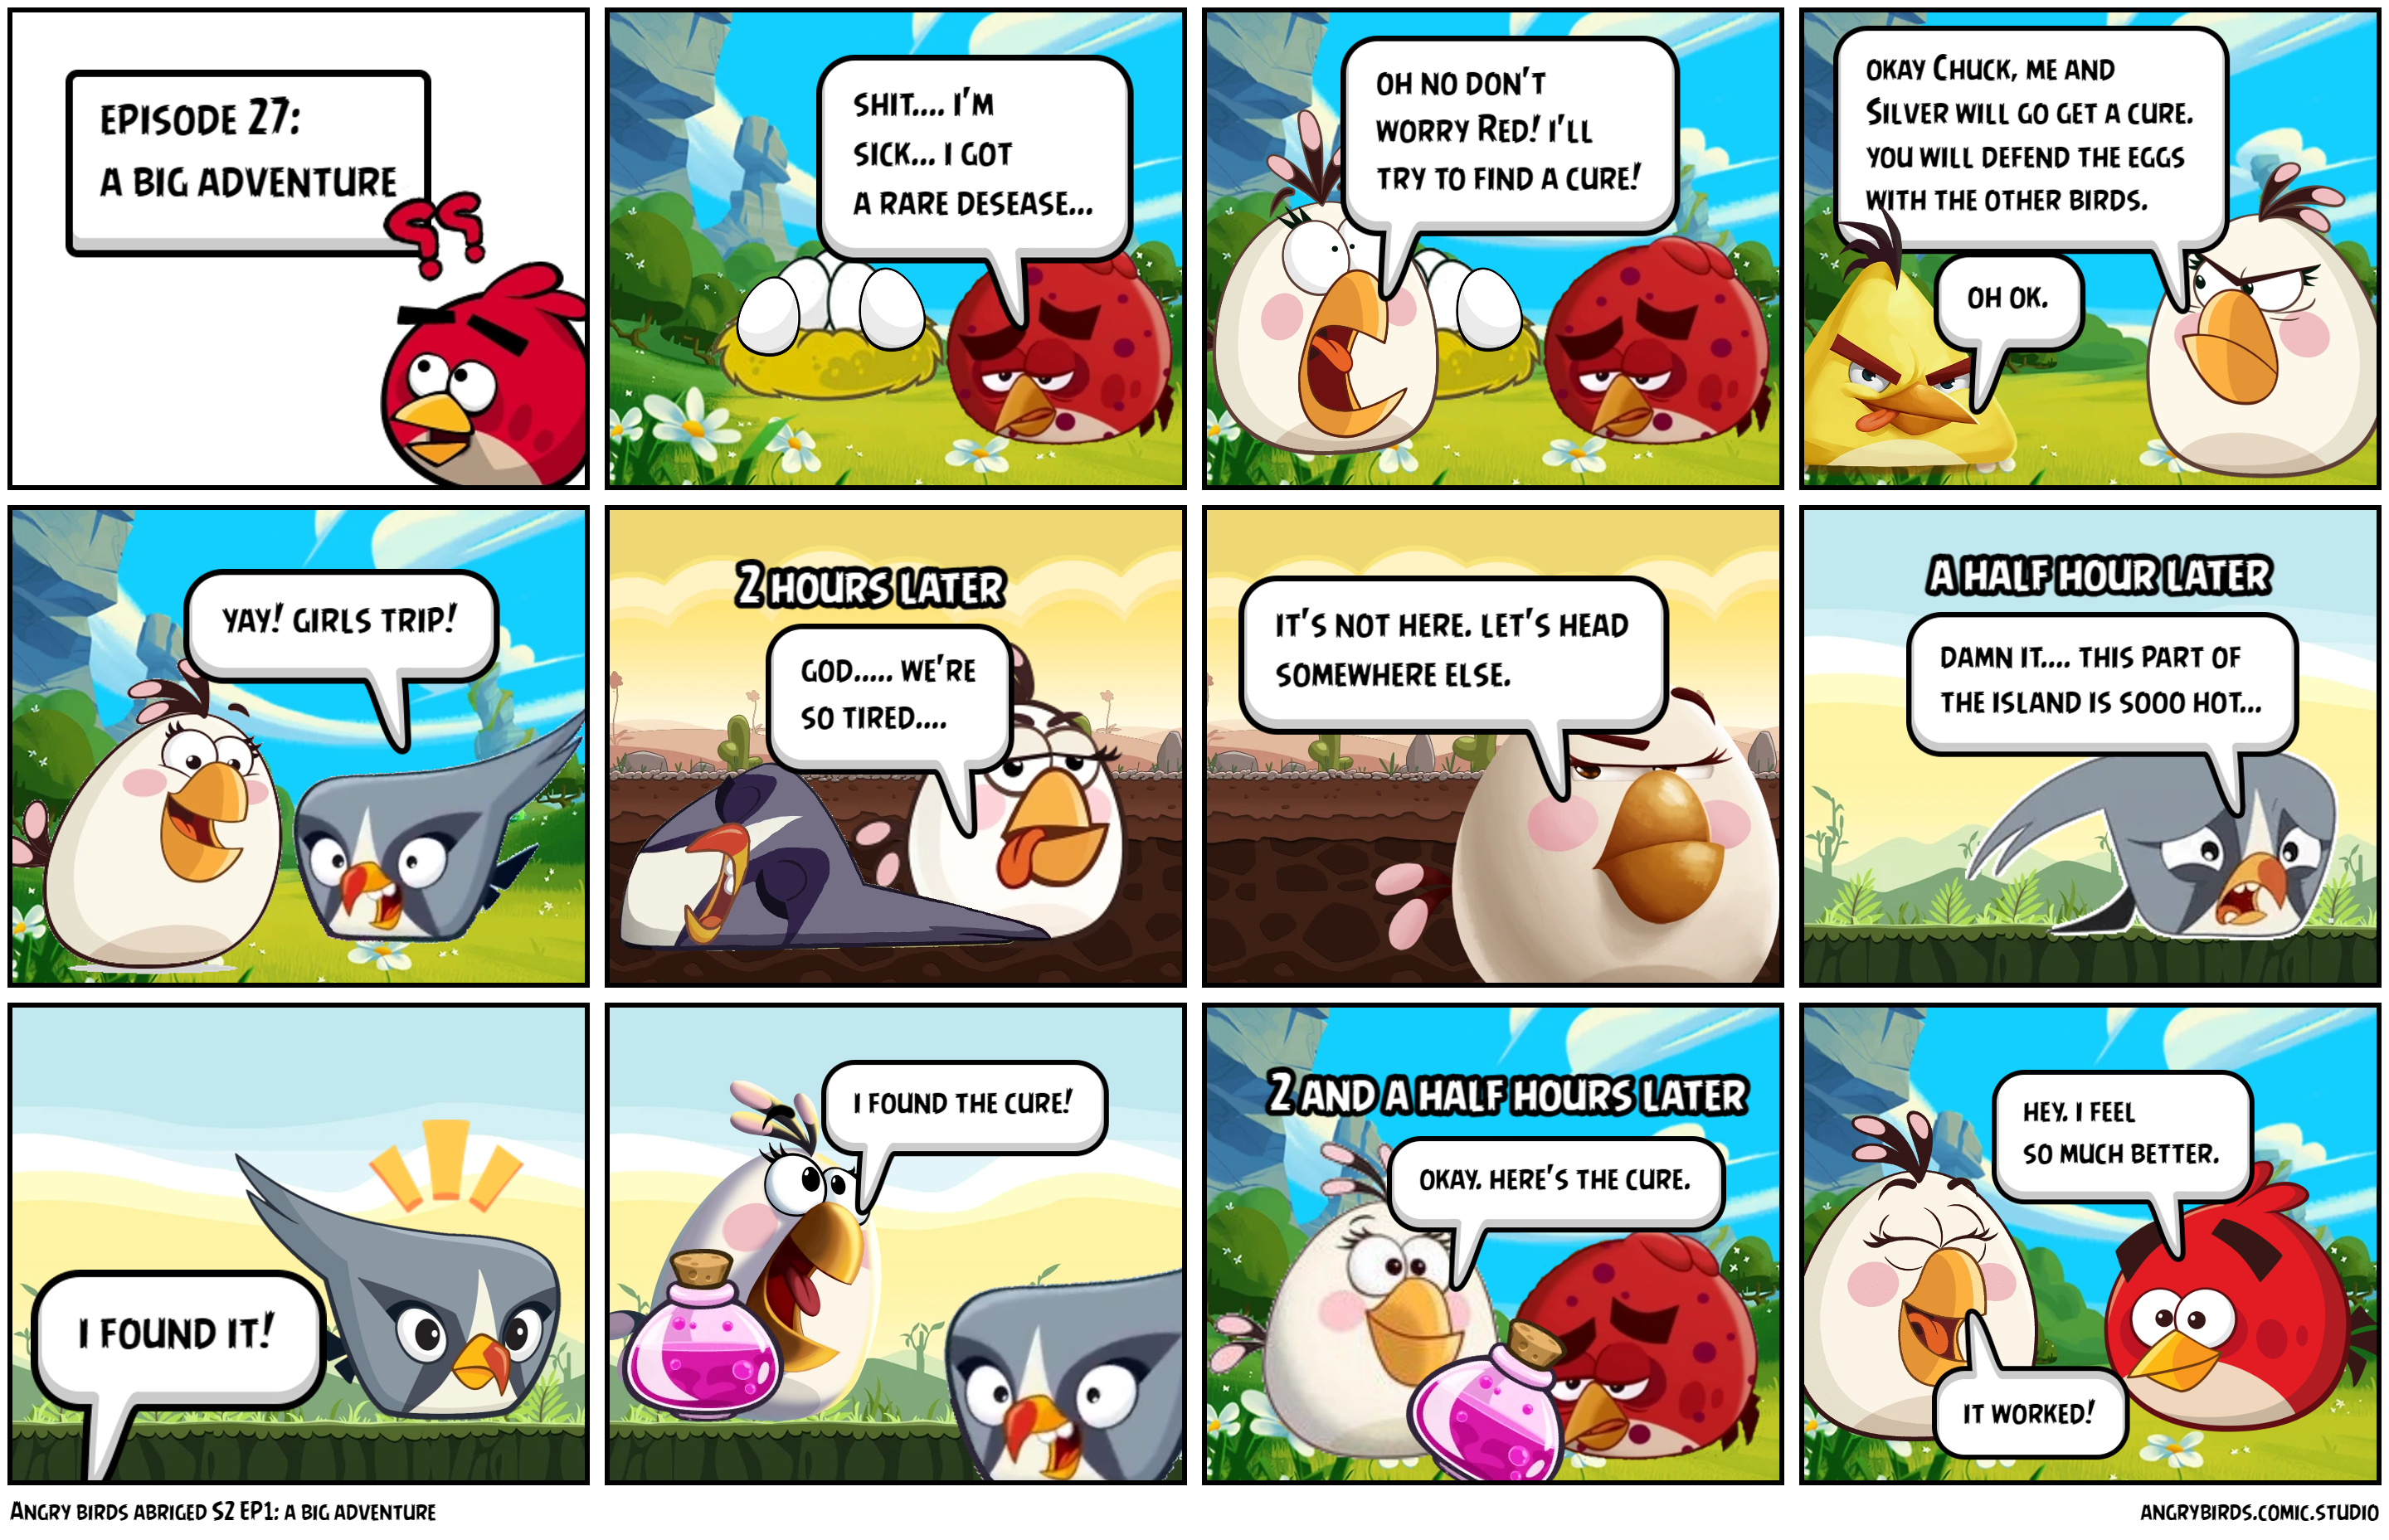 Angry birds abriged S2 EP1: a big adventure